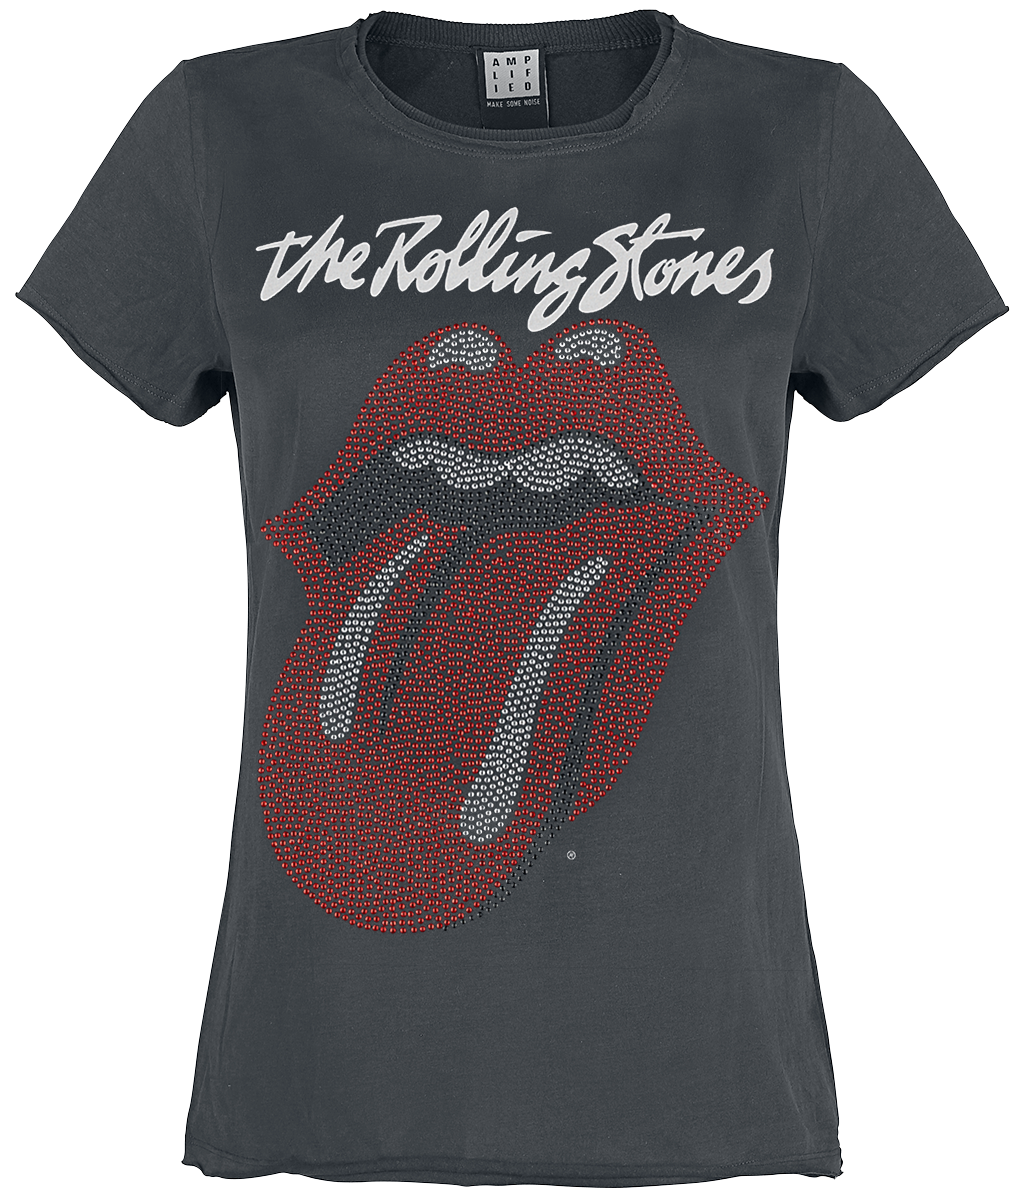 The Rolling Stones - Amplified Collection - Tongue Diamante - Girls shirt - charcoal image